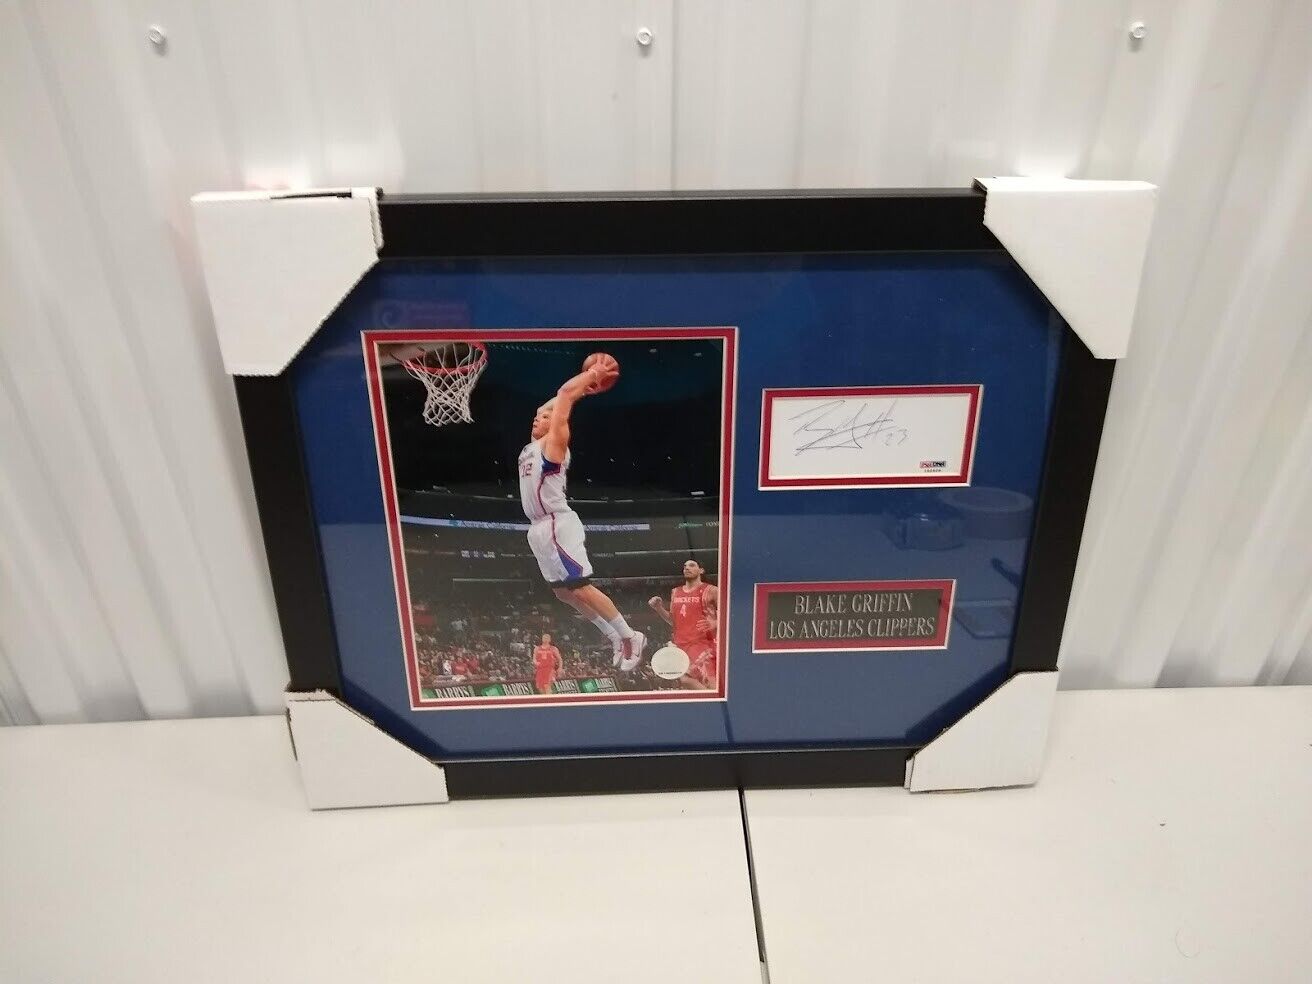 Blake Griffin Autographed 3x5 Index Card With 8x10 Photo Framed & Matted PSA/DNA